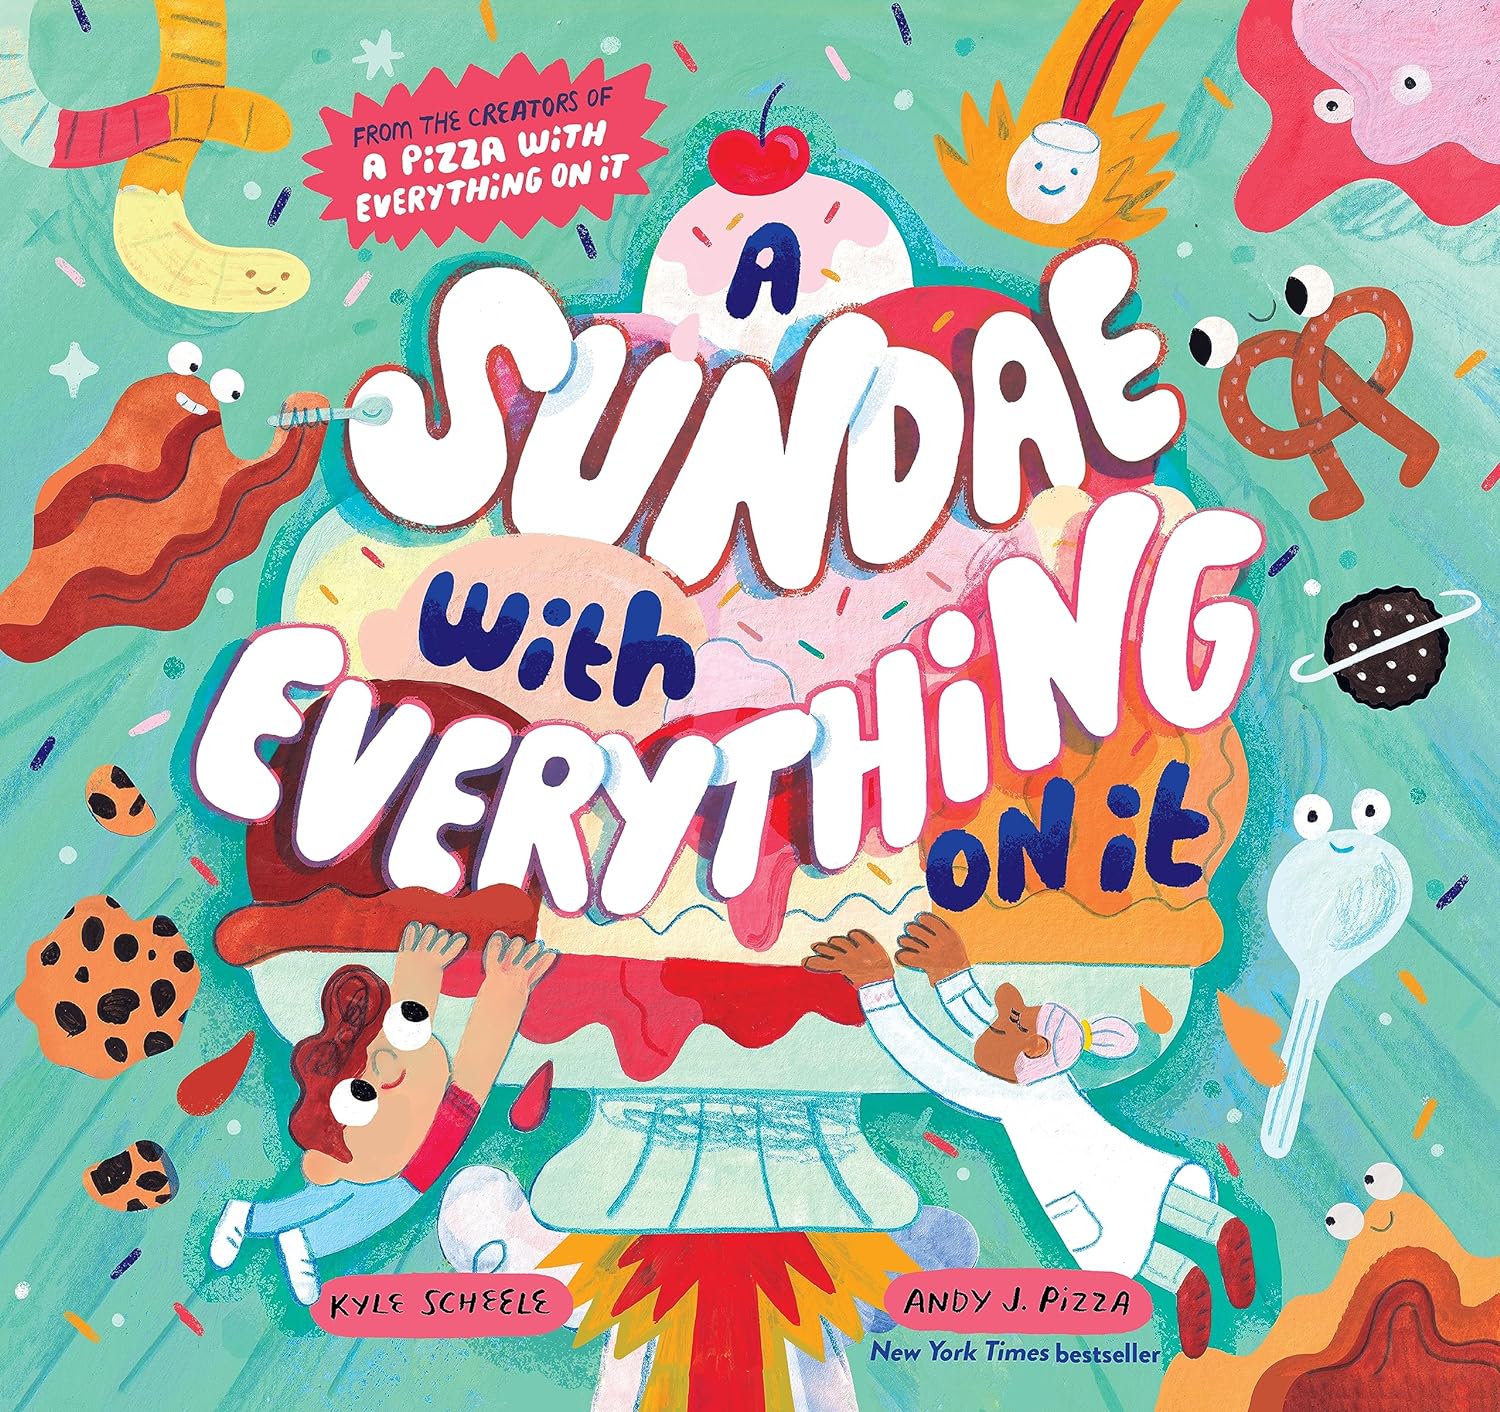 "A Sundae with Everything on It" Book